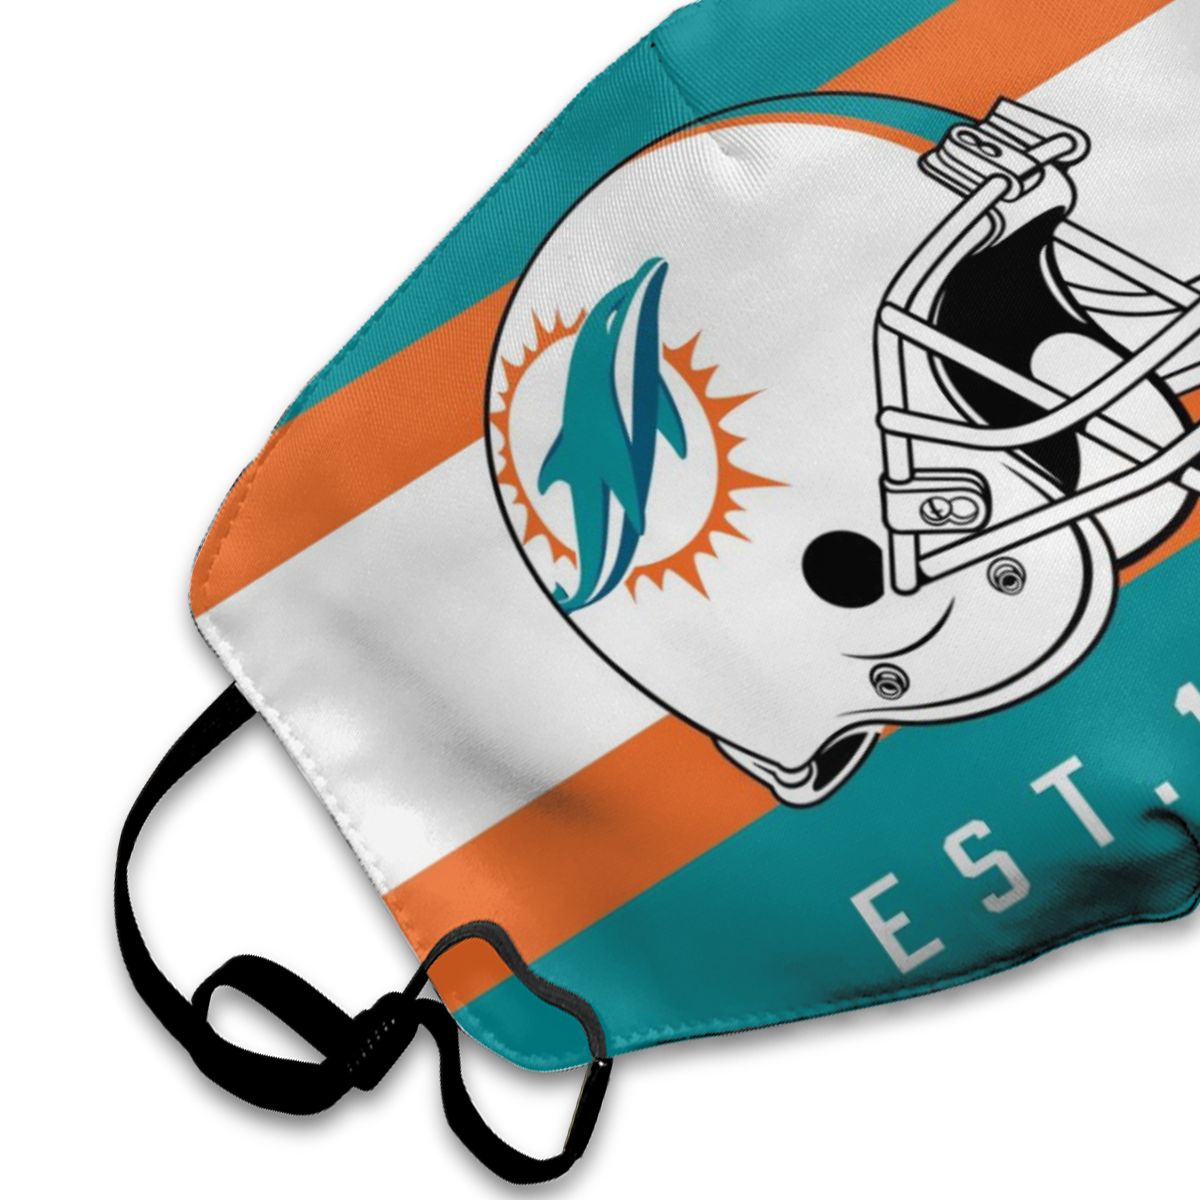 Print Football Personalized Miami Dolphins Dust Masks